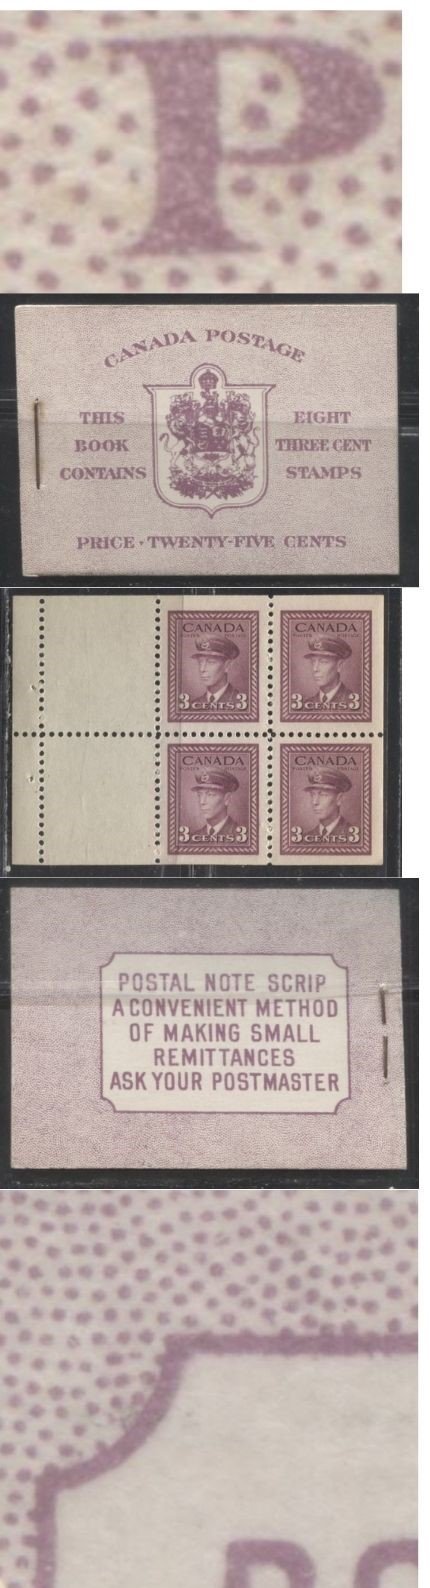 Lot 68 Canada #BK35d 1942-1949 War Issue, Type II, Complete 25¢ English Booklet, 2 Panes of 3c Rosy Plum, Horizontal Ribbed Paper, Harris Front Cover Type IIe, Back Cover Type Caiv, 7c and 5c Airmail Rate Page